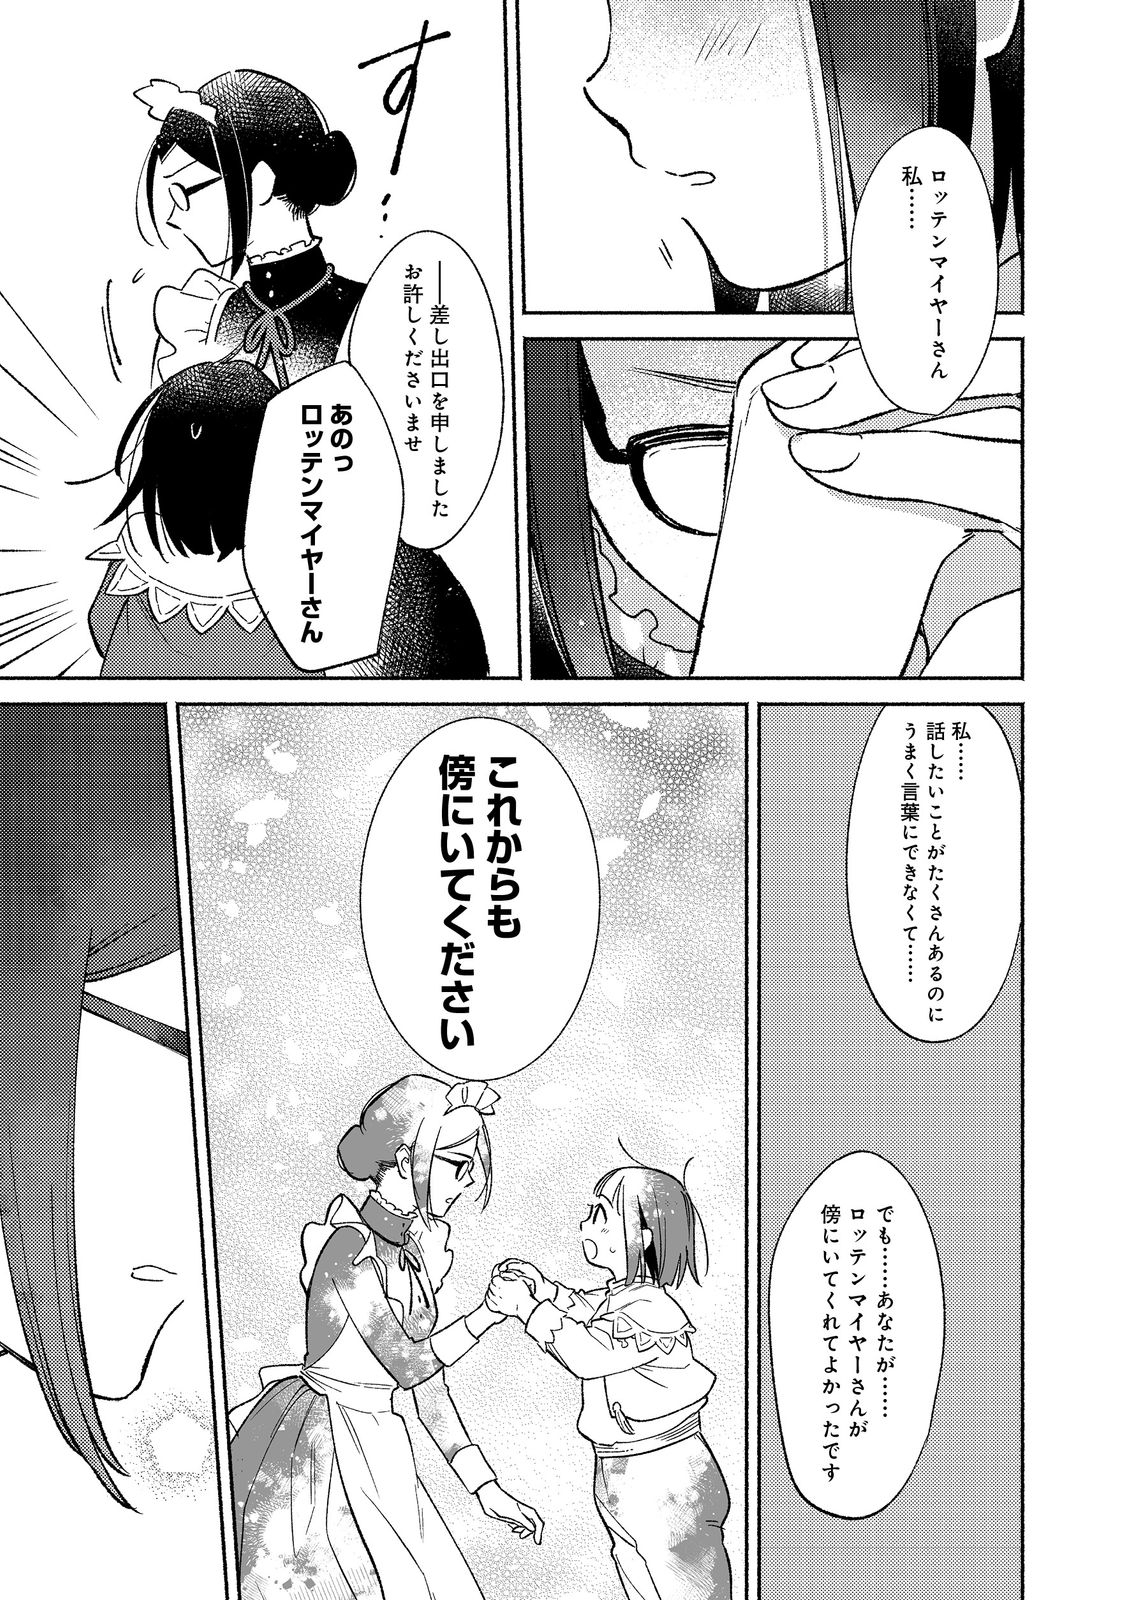 I’m the White Pig Nobleman 第16.2話 - Page 13